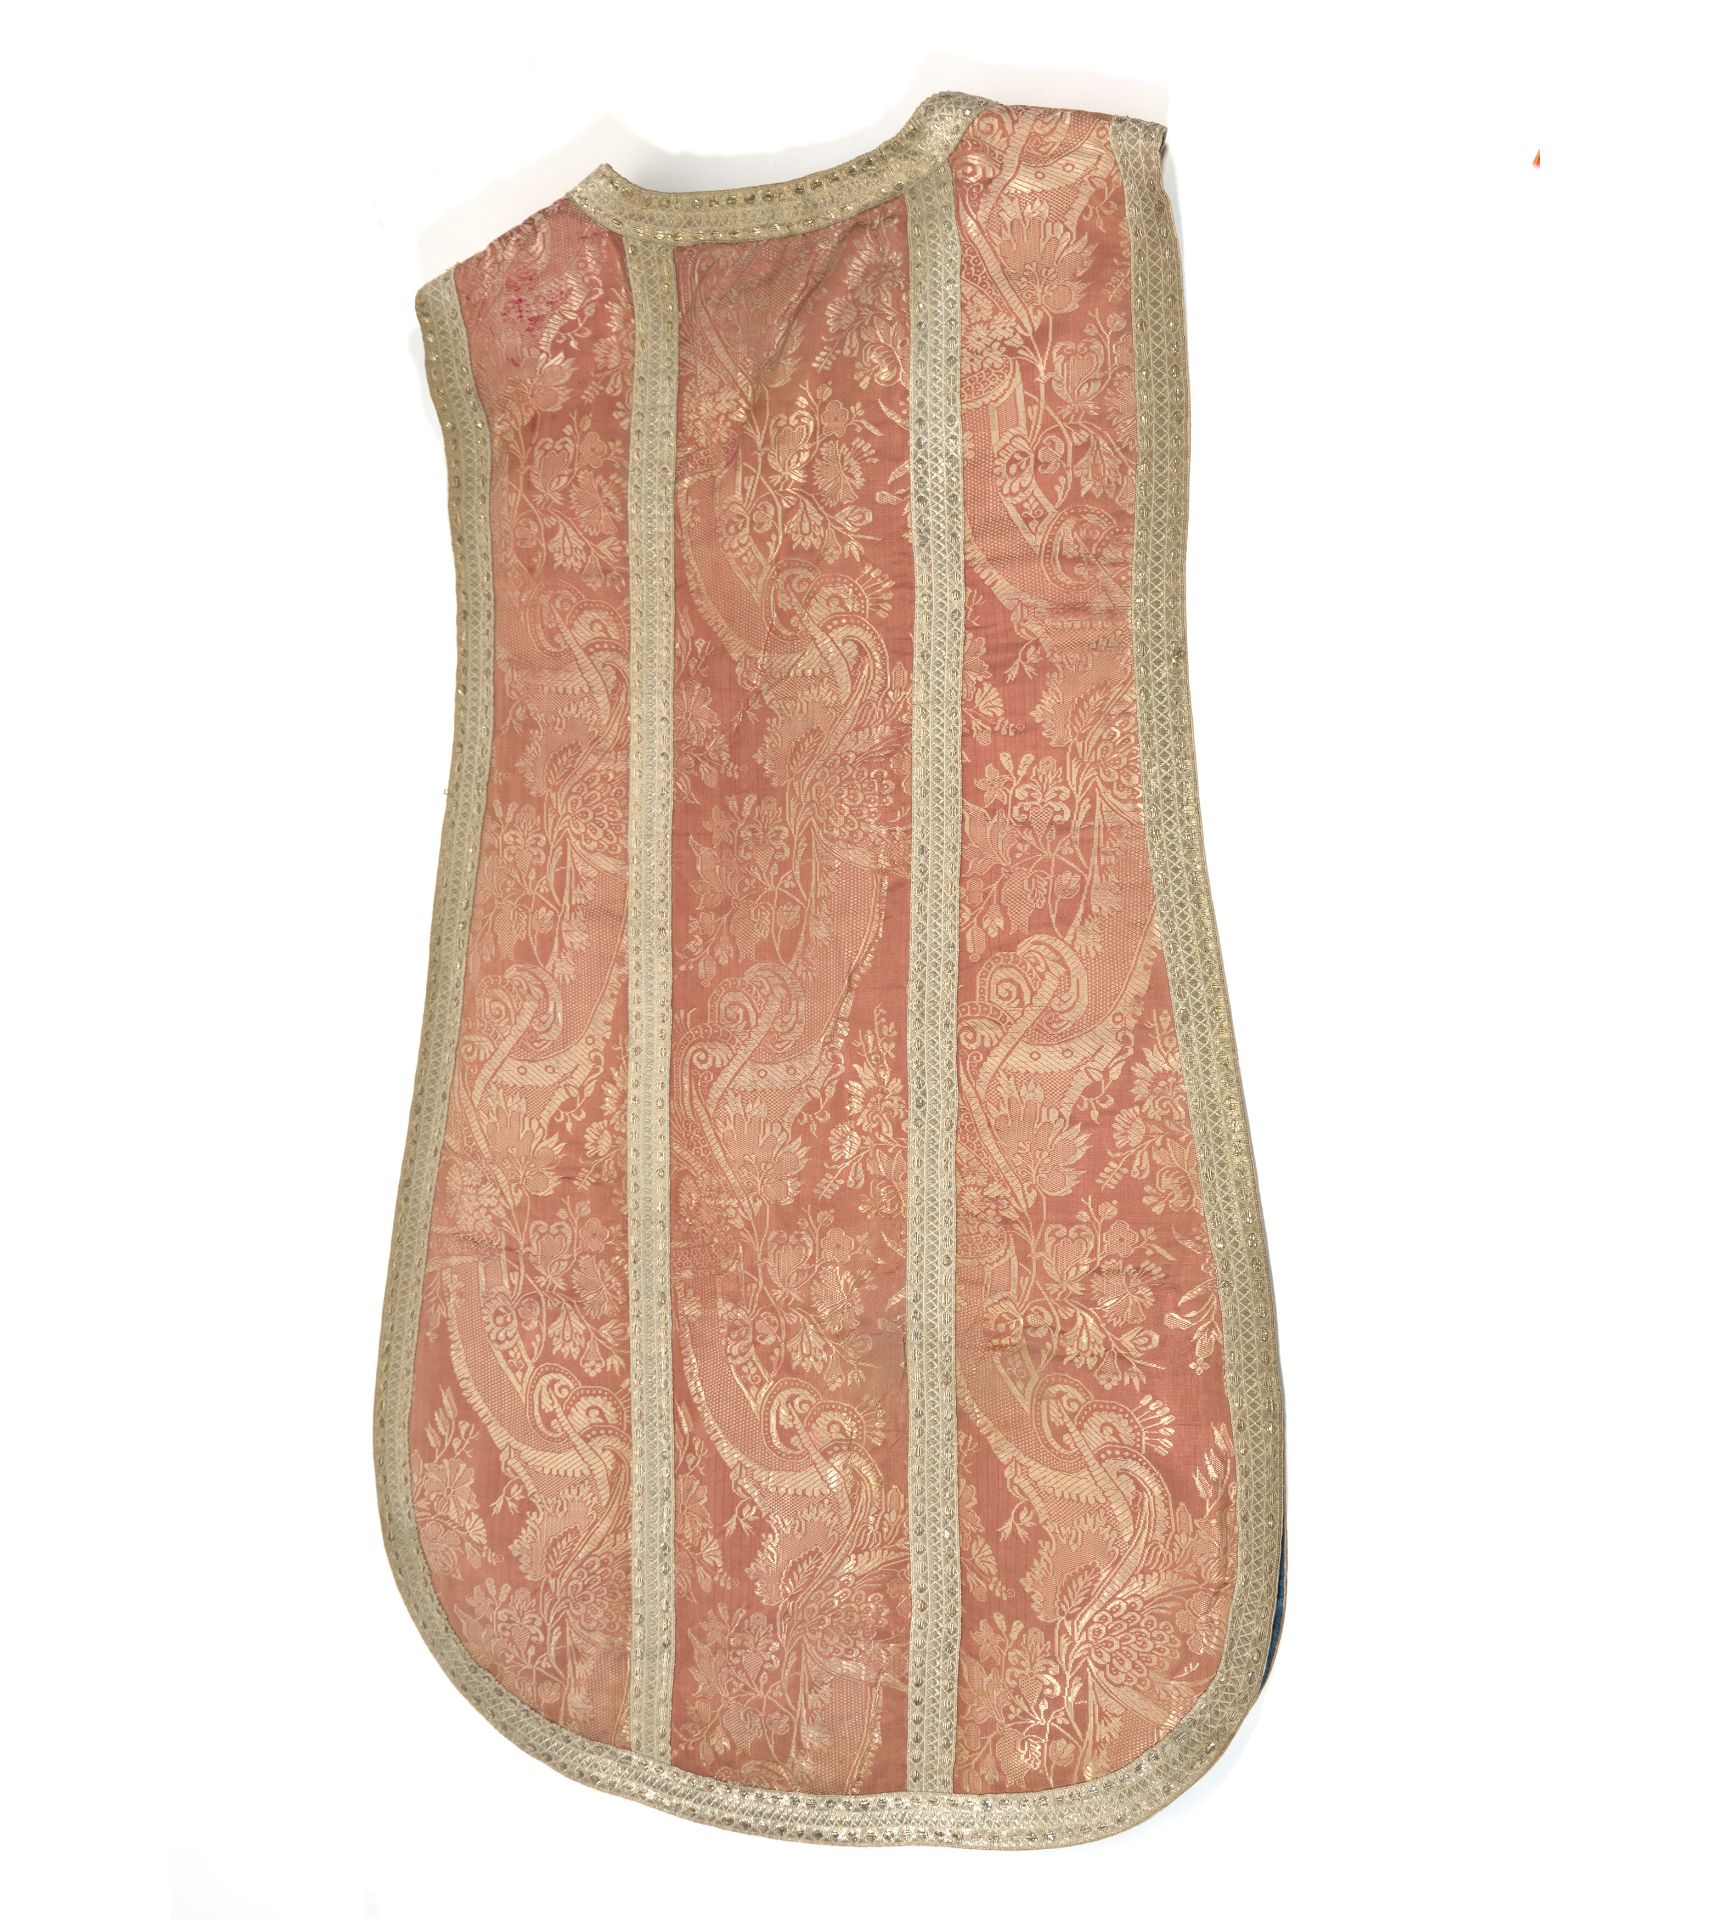 Ecclesiastical Priest's Chasuble, in silk, 19th century - Image 5 of 5